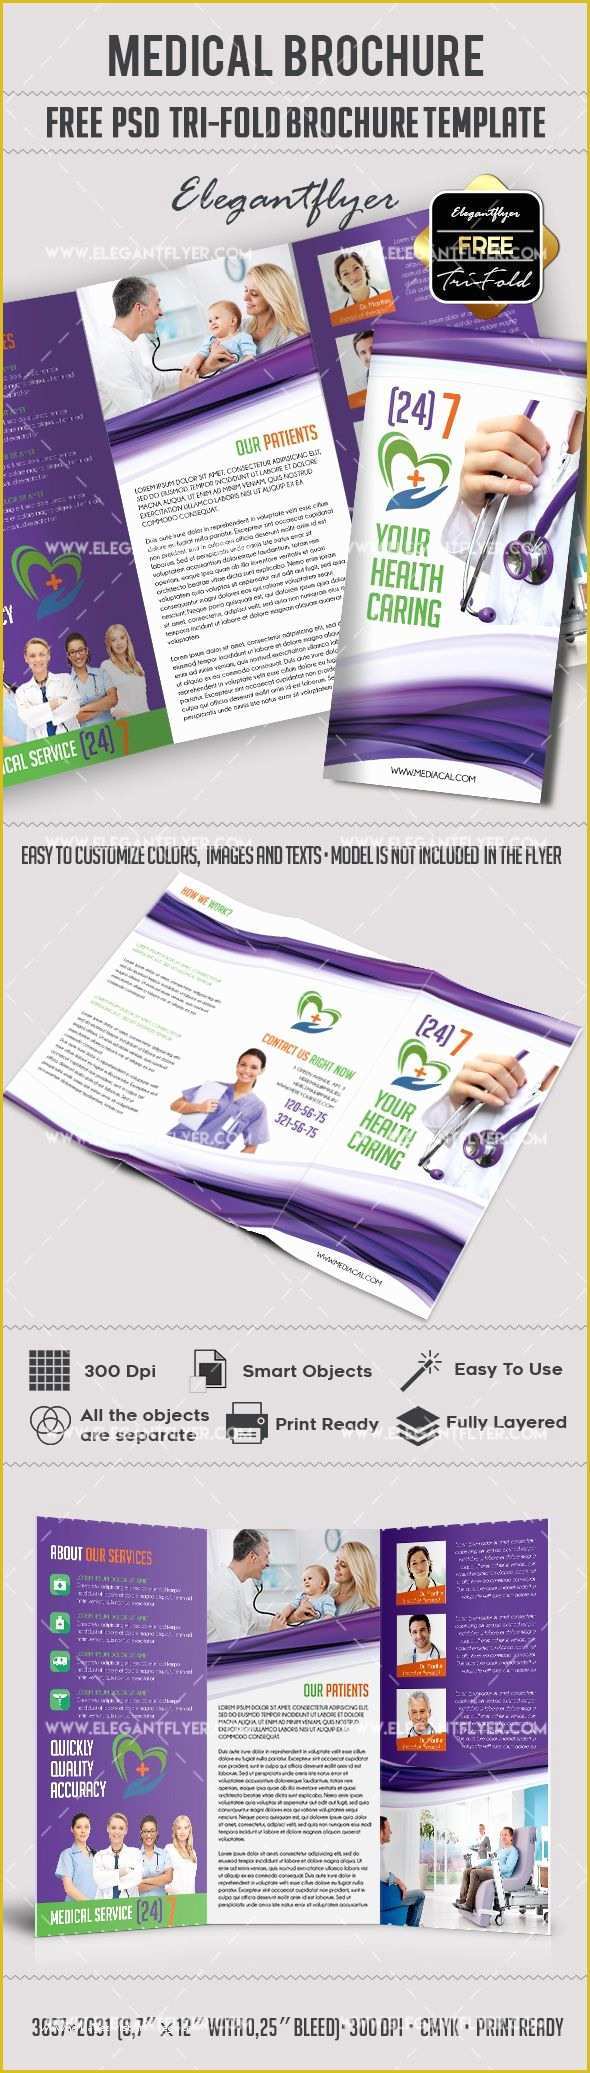 Medication Brochure Templates Free Of 1000 Ideas About Medical Brochure On Pinterest